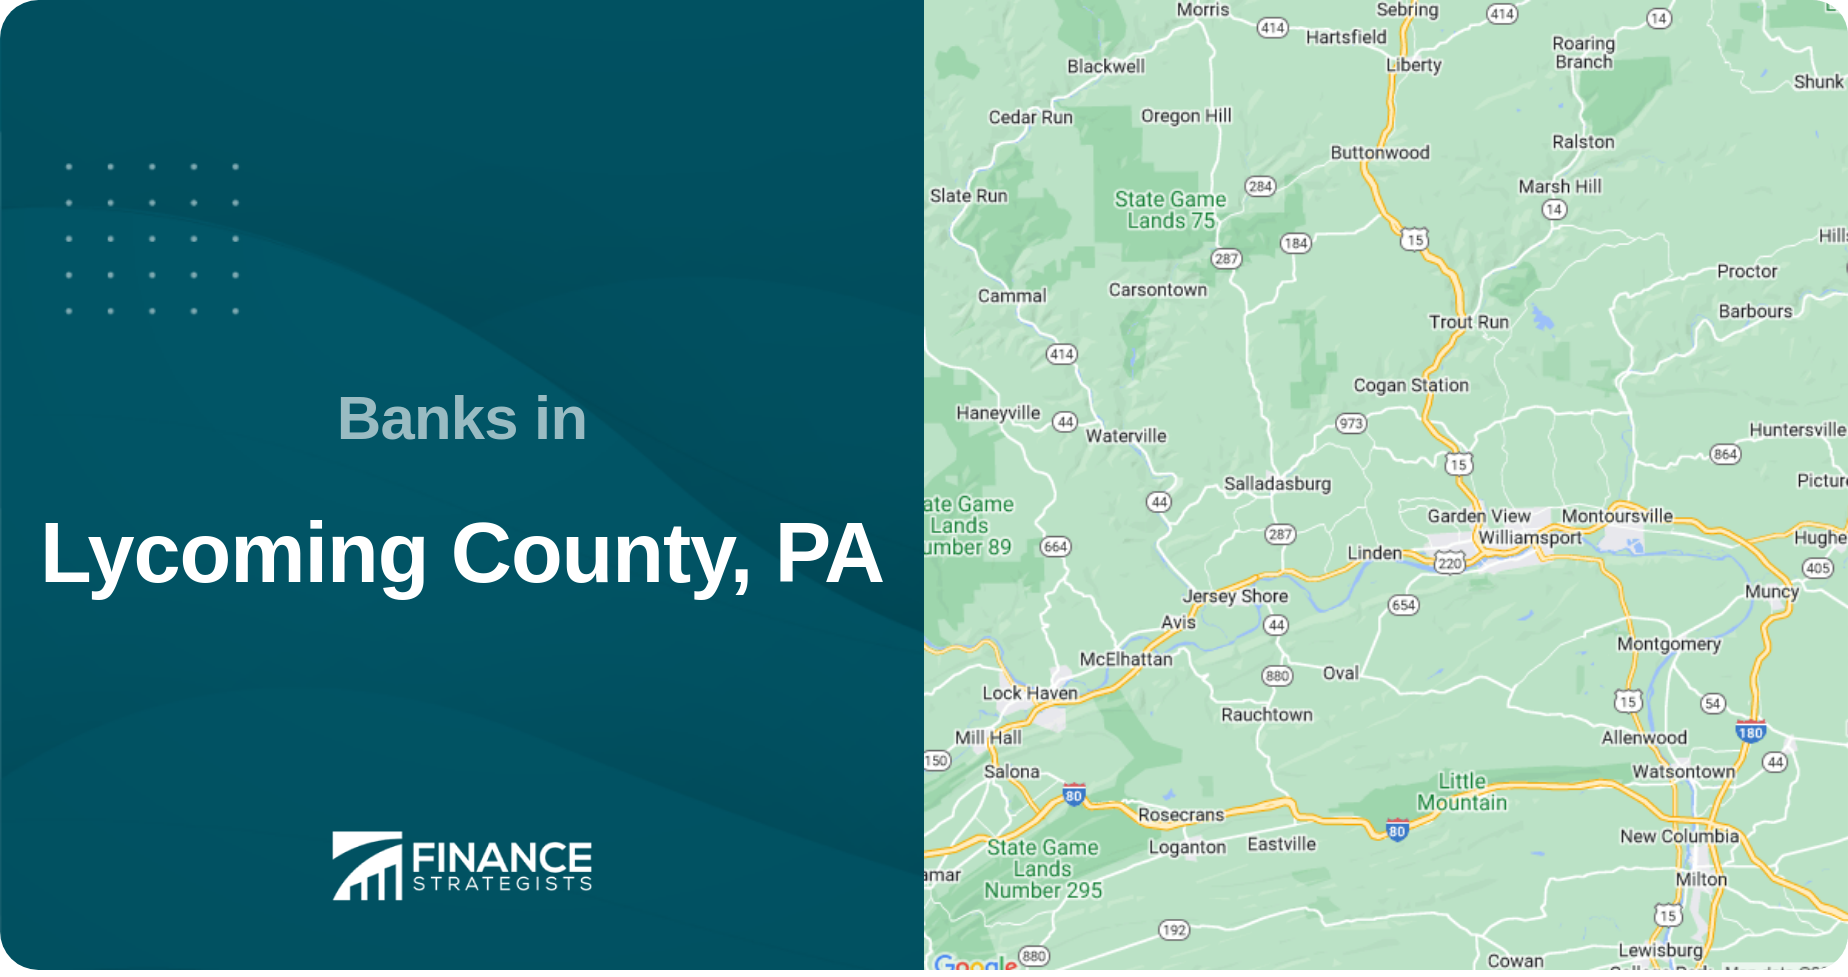 Banks in Lycoming County, PA